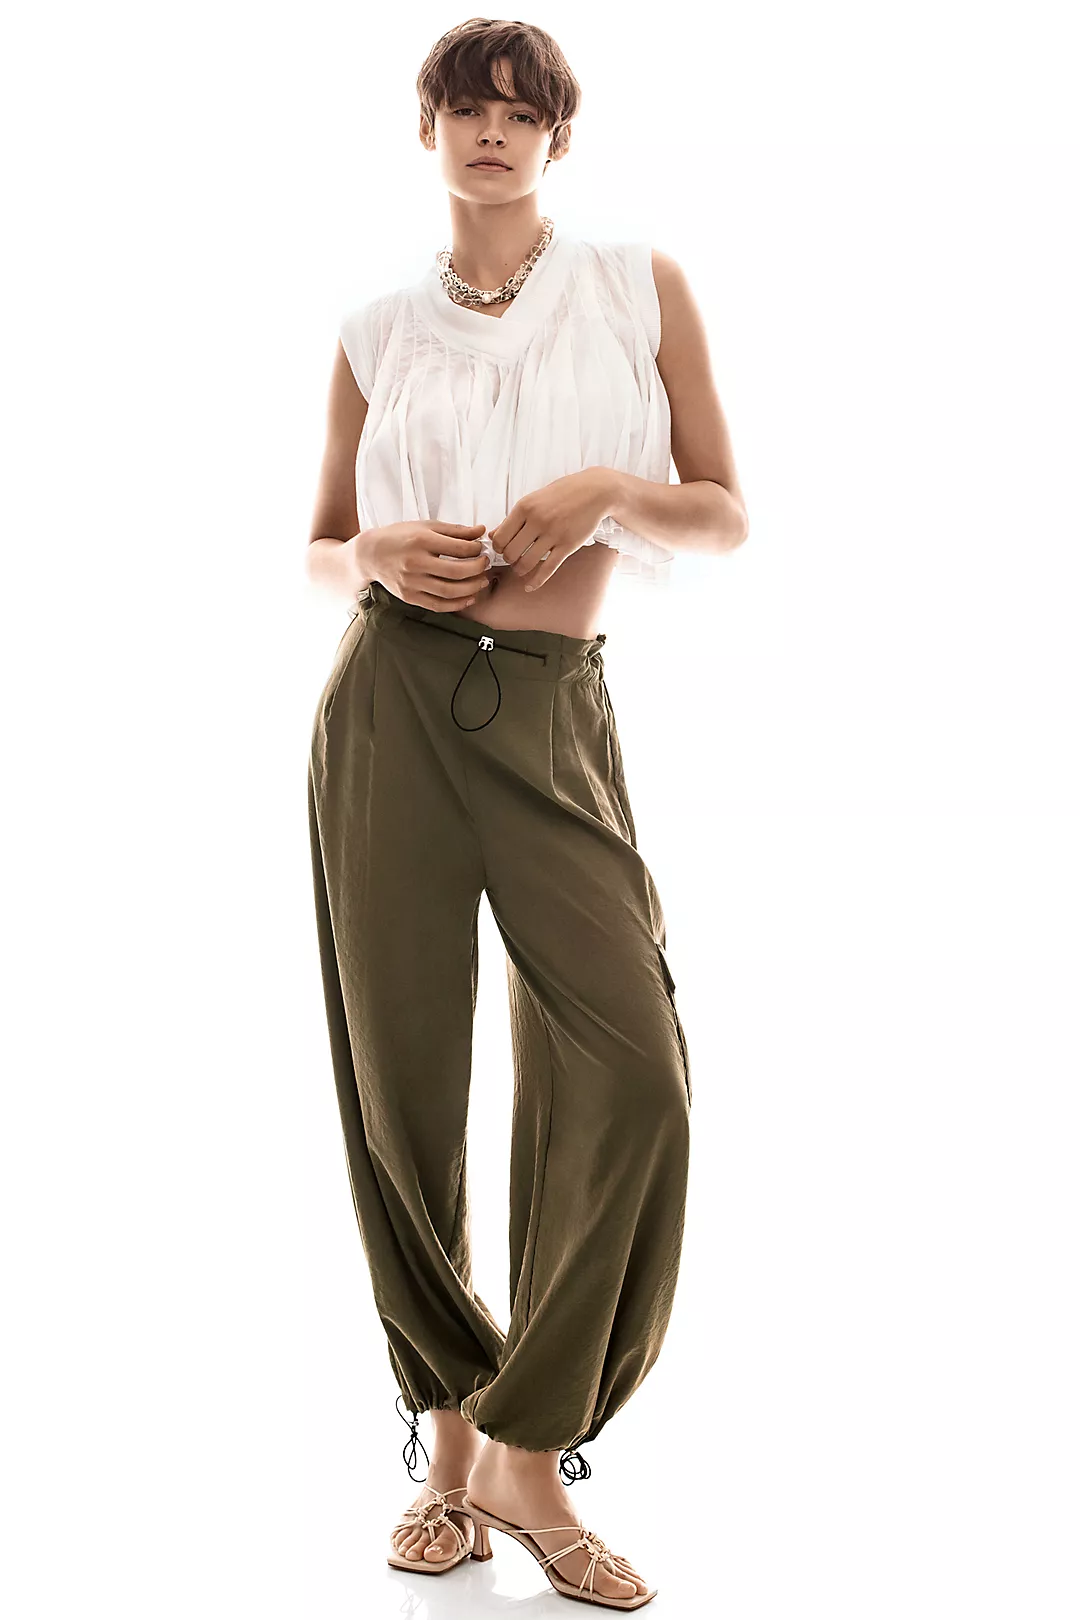 anthropologie.com | By Anthropologie Bungee Parachute Pants